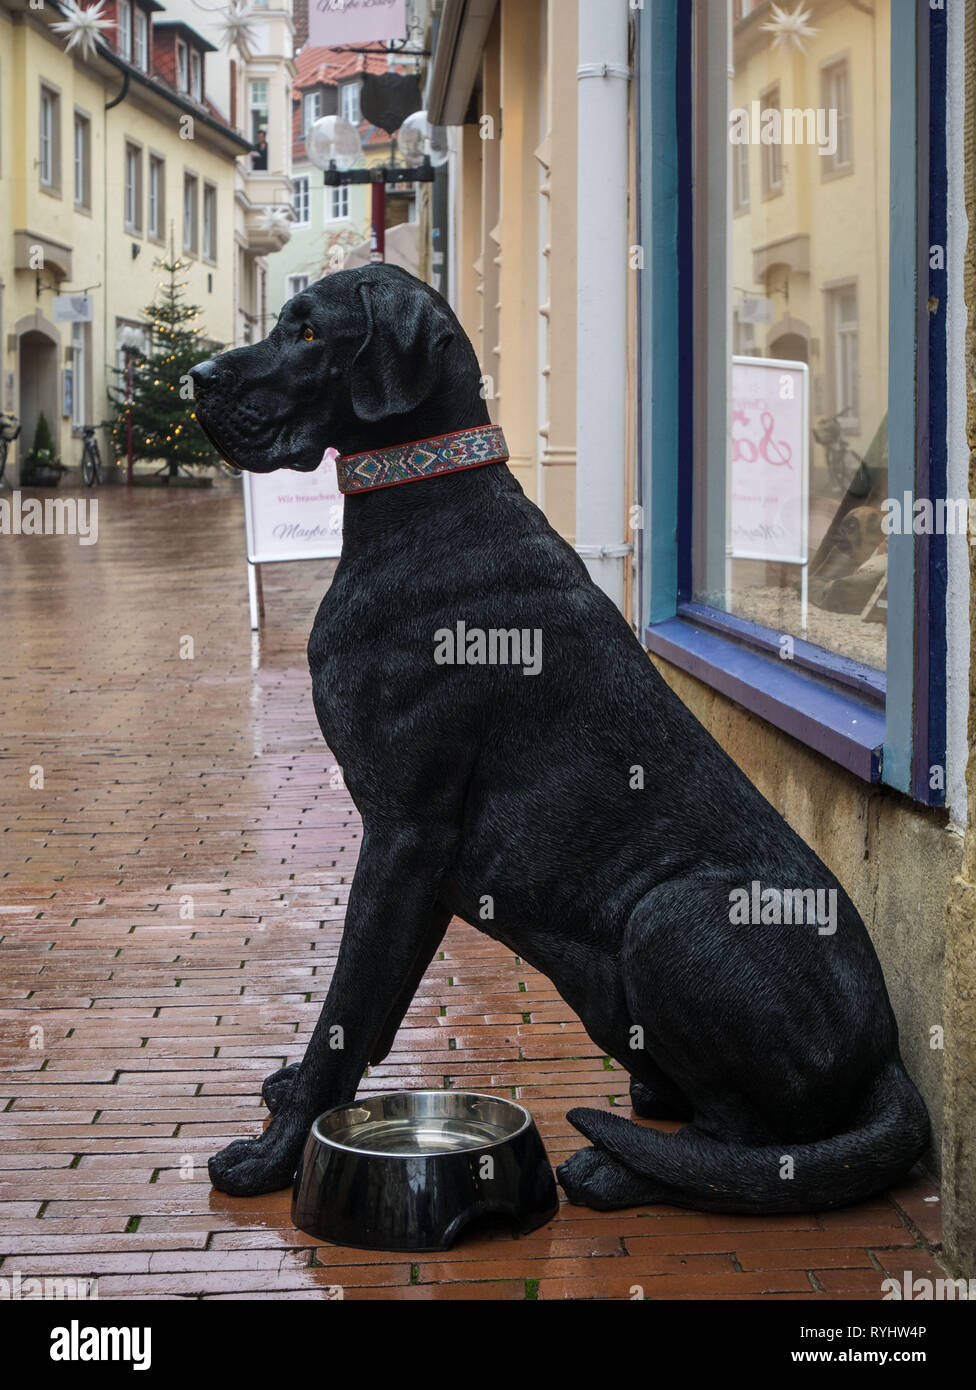 Puppet of a black Great Dane in front of a shop in the Old Town of Osnabrück, Germany Stock Photo